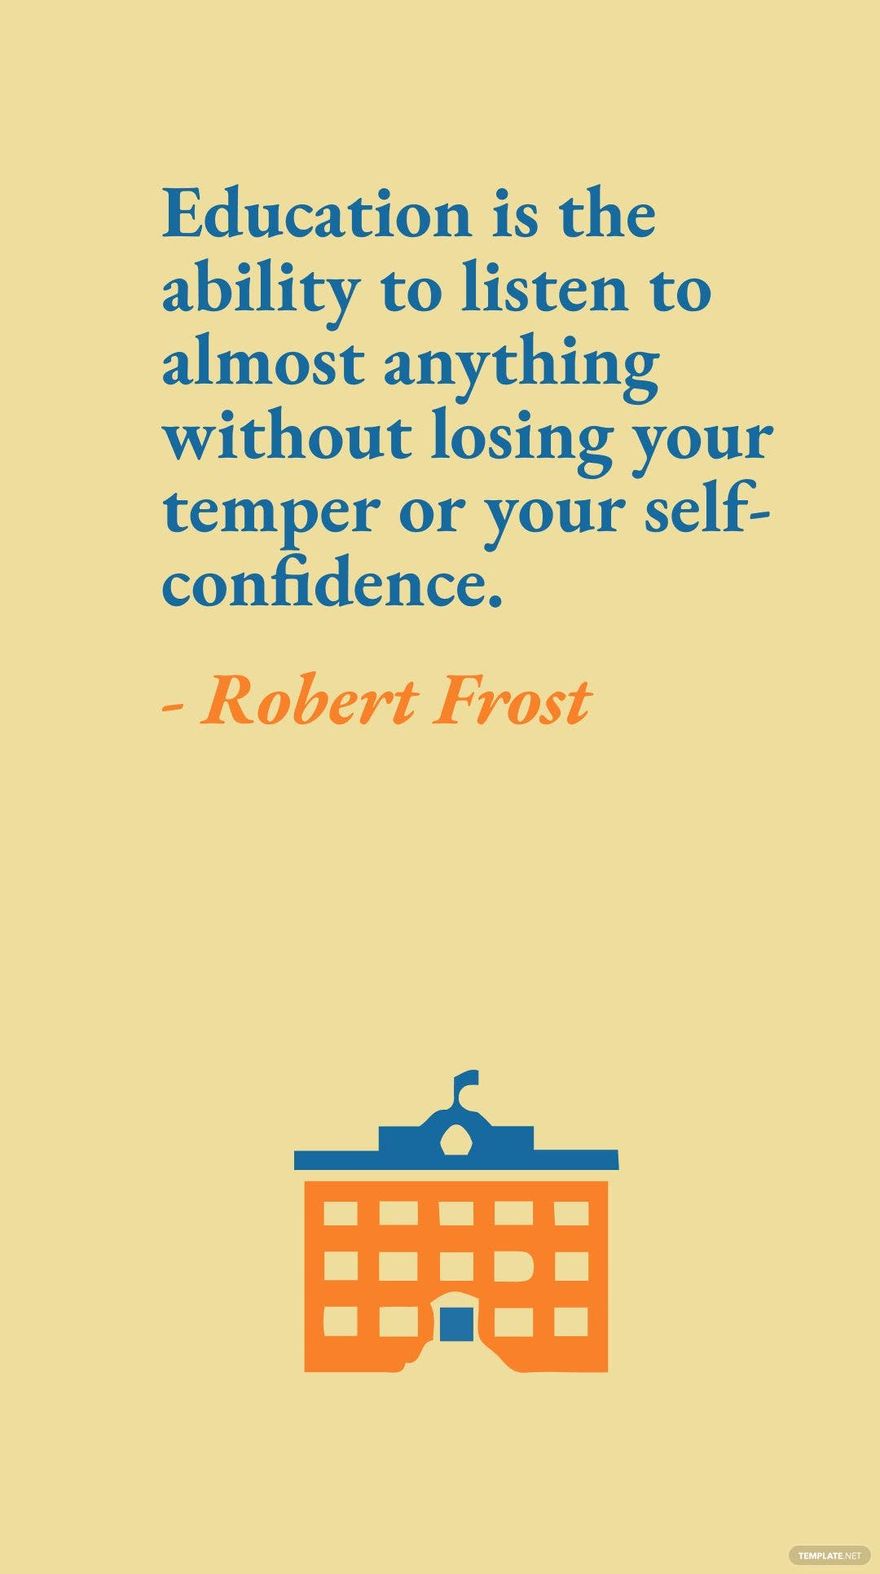 Free Robert Frost - Education is the ability to listen to almost anything without losing your temper or your self-confidence. in JPG